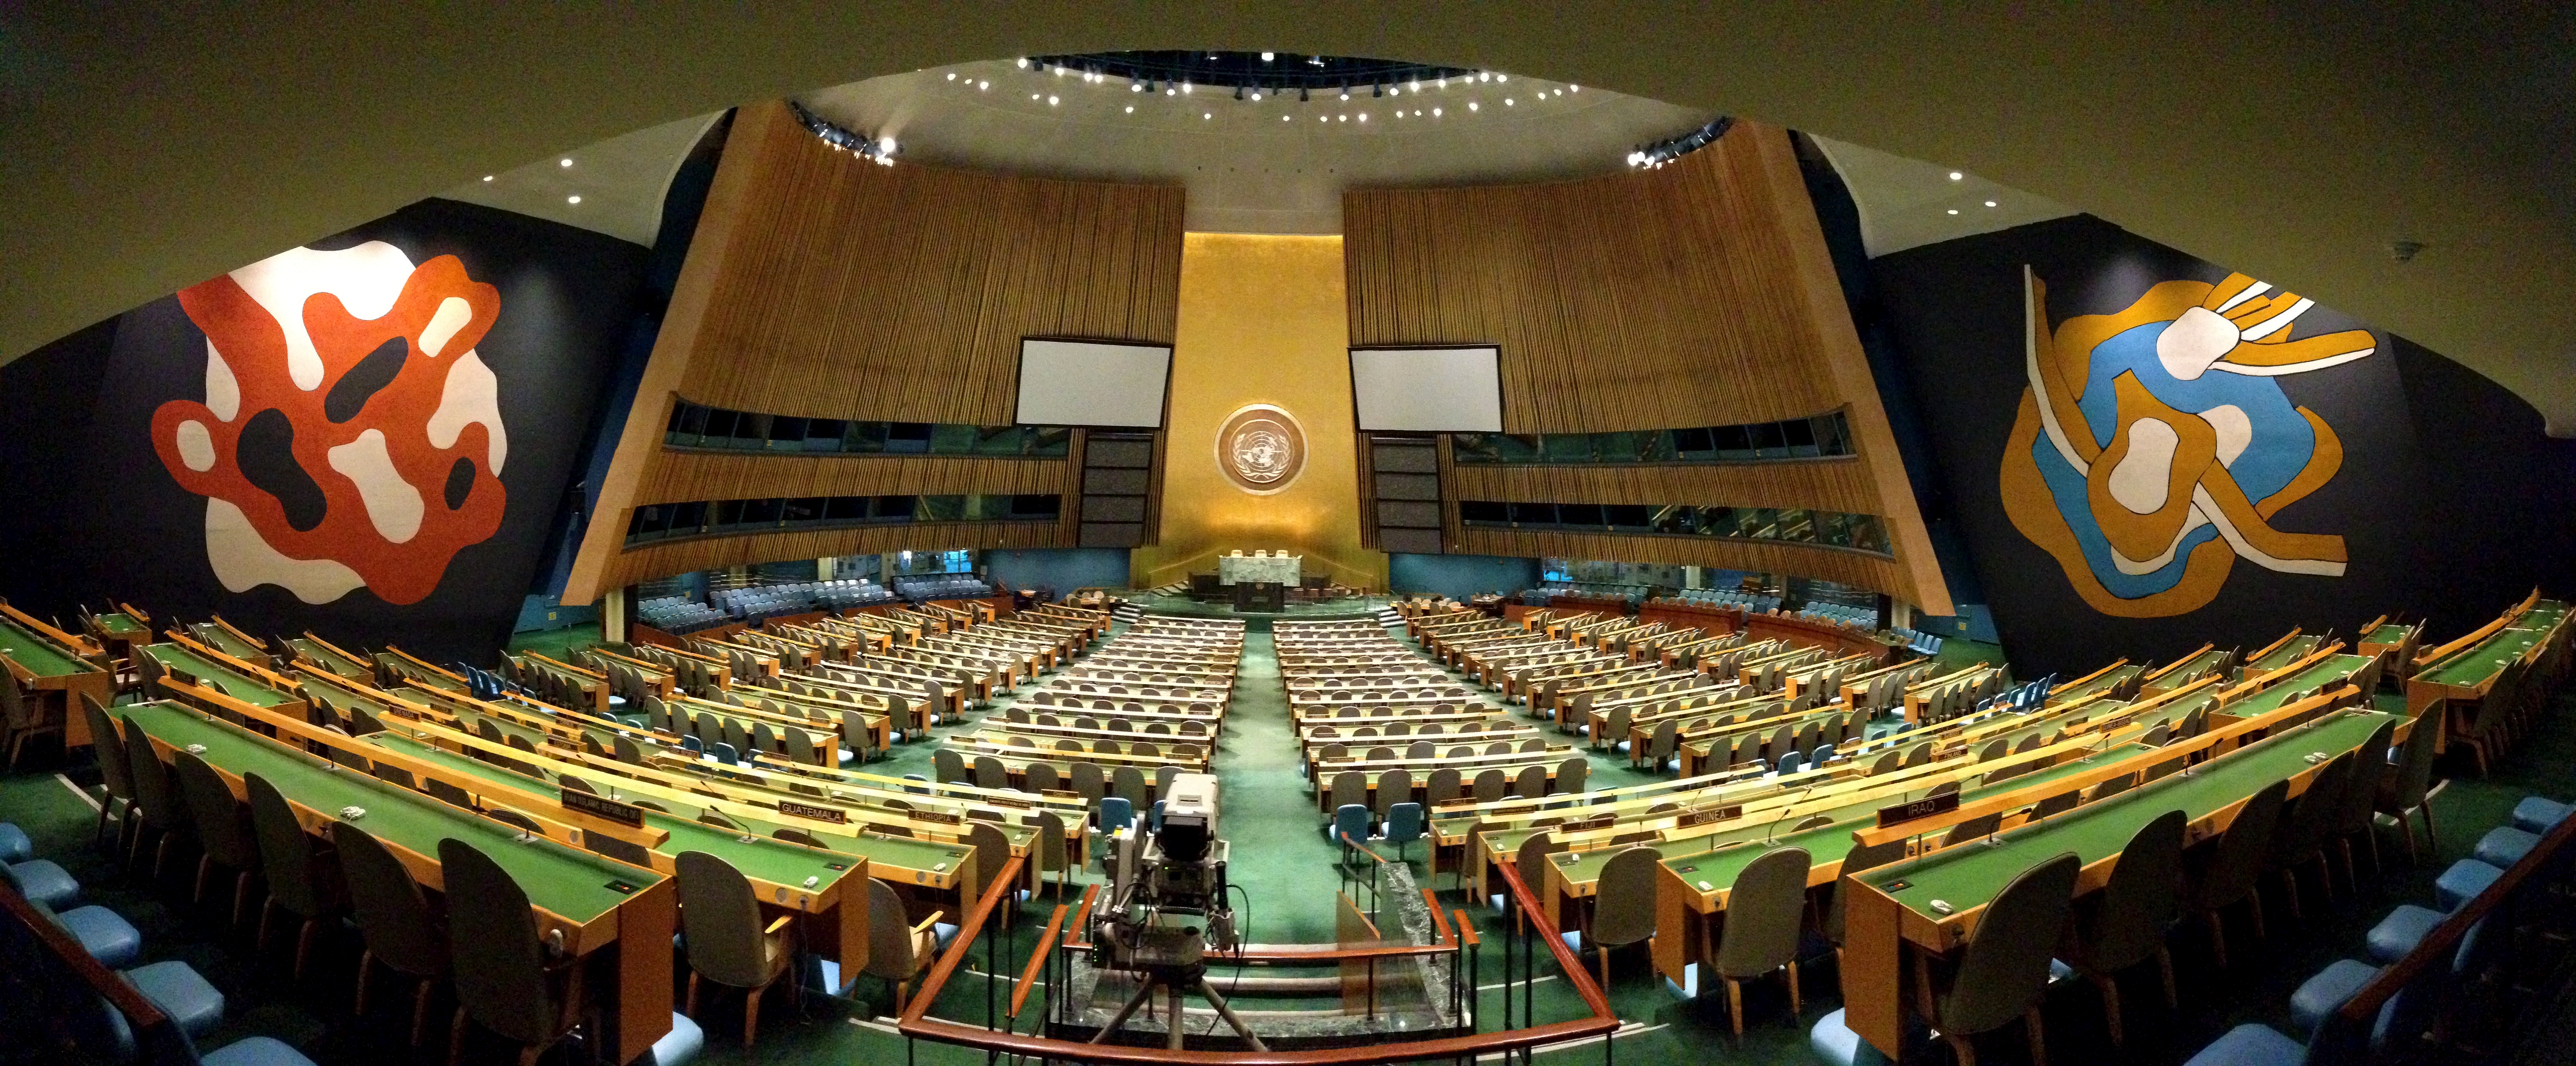 The UN General Assembly hall